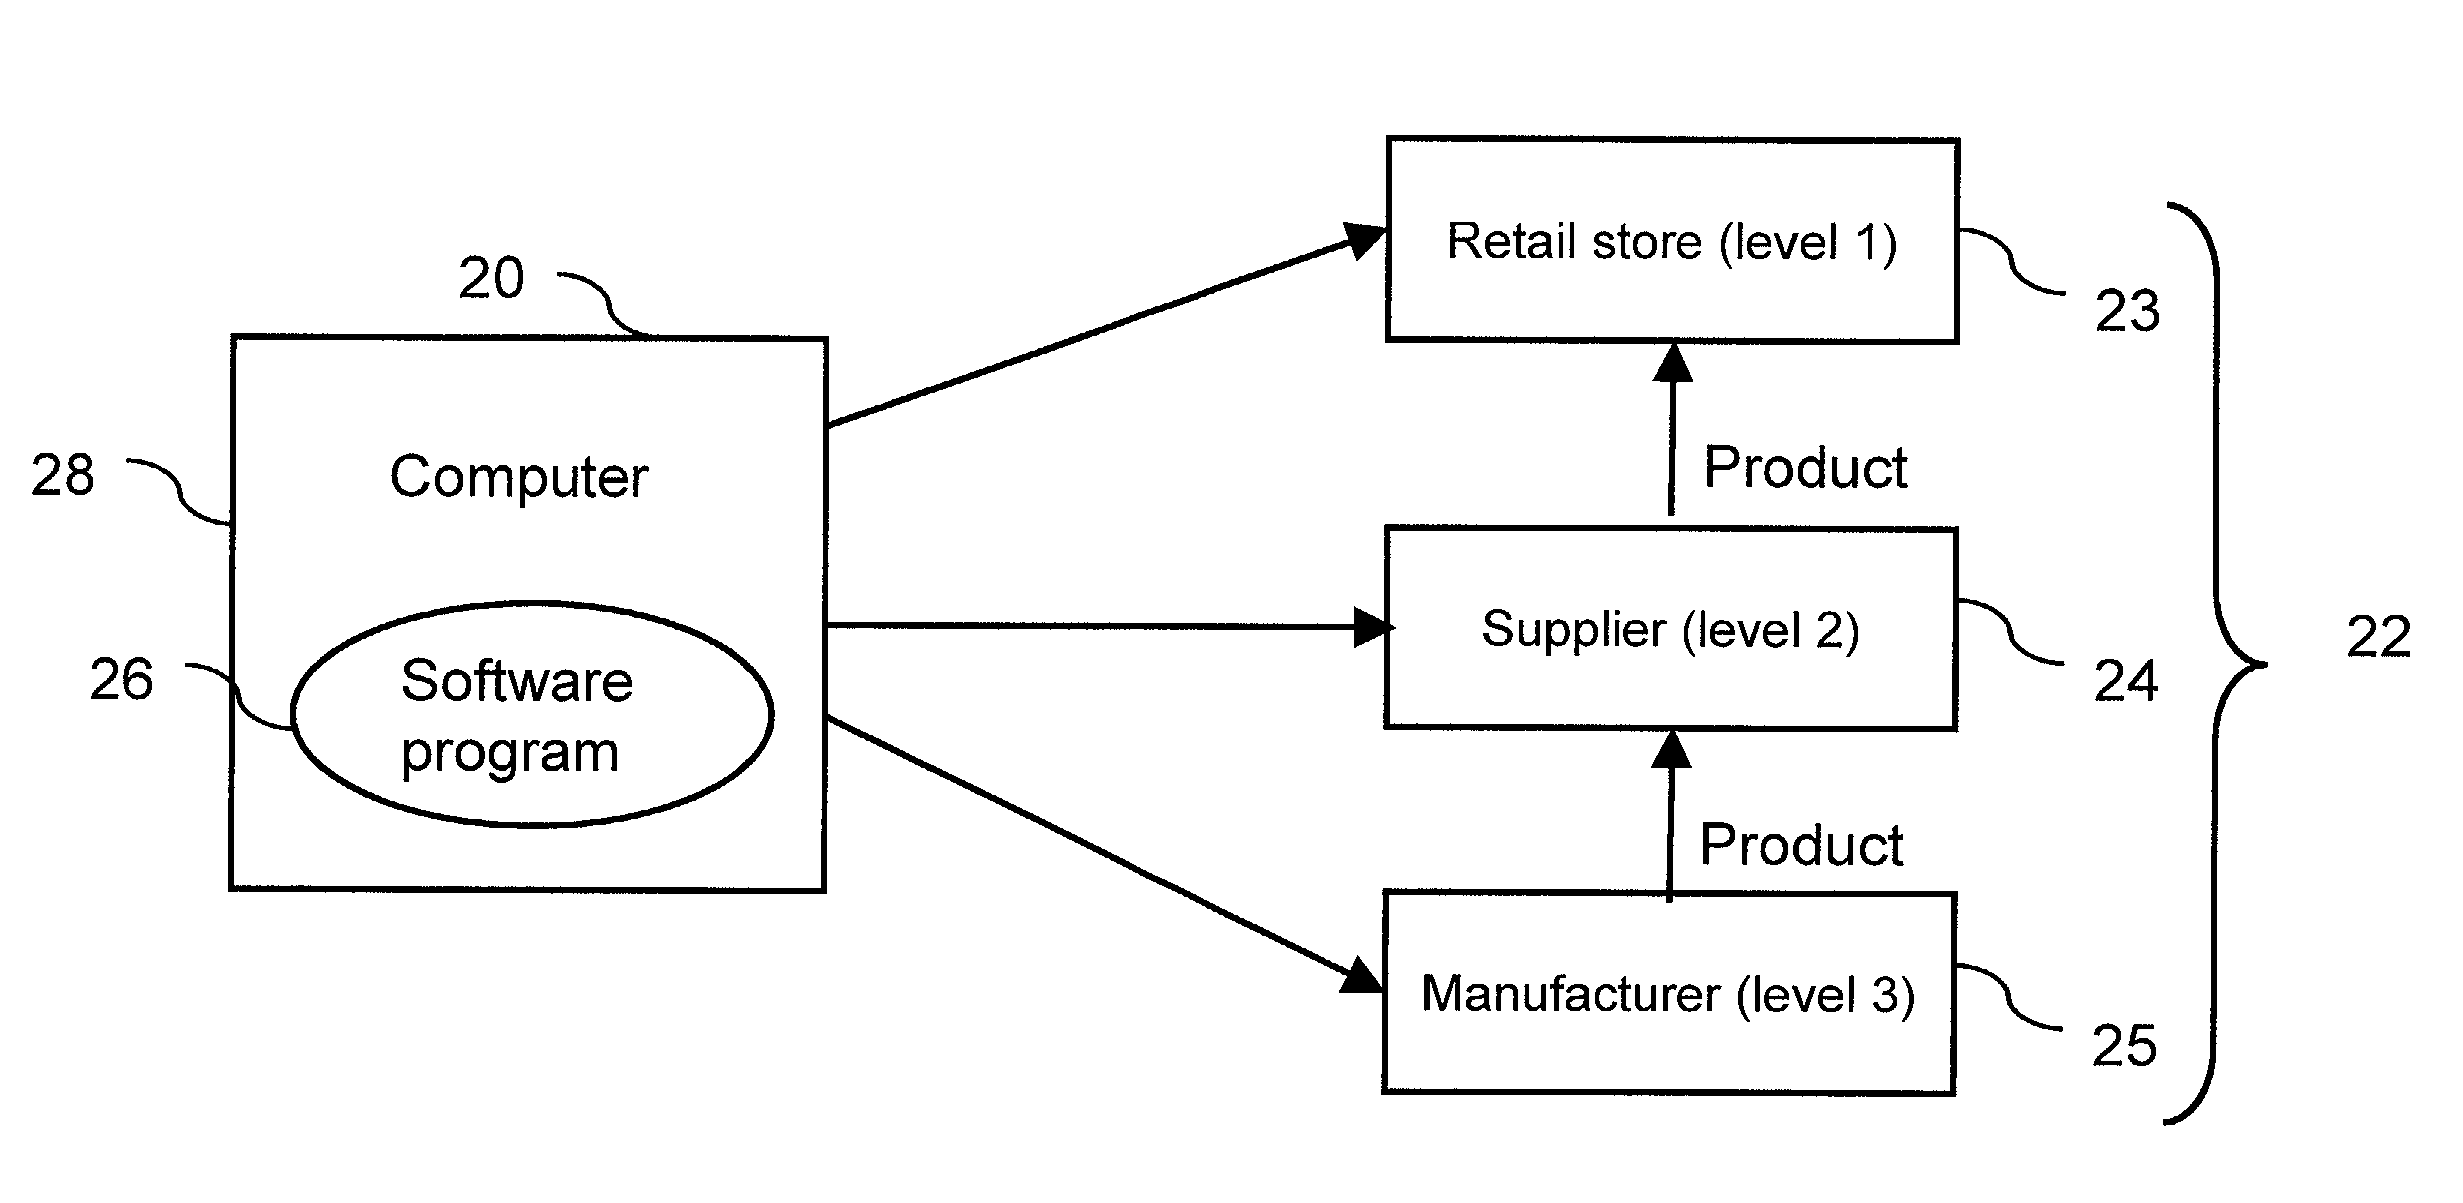 Method and system for retail store supply chain sales forecasting and replenishment shipment determination